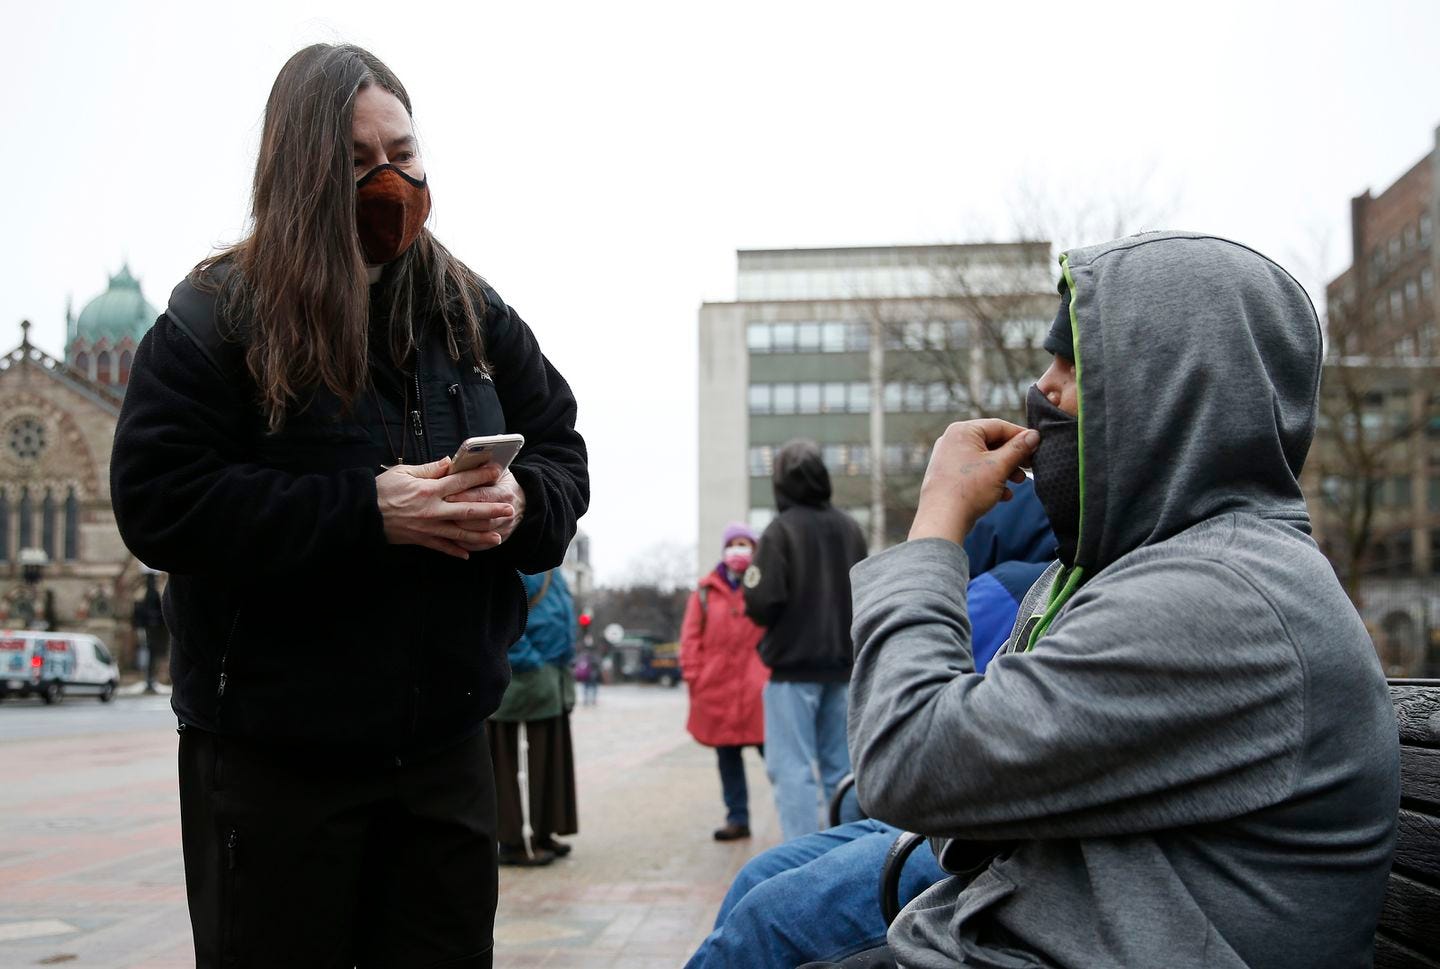 Boston, MA -- 3/1/21 -- Lisa Loughlin, a chaplain who is part of 'Common Cathedral' an organization which has ecumenical services on Boston Common, offers her phone to a homeless man in Copley Square who had asked to use it so he could try and call a family member.  (Jessica Rinaldi/Globe Staff)